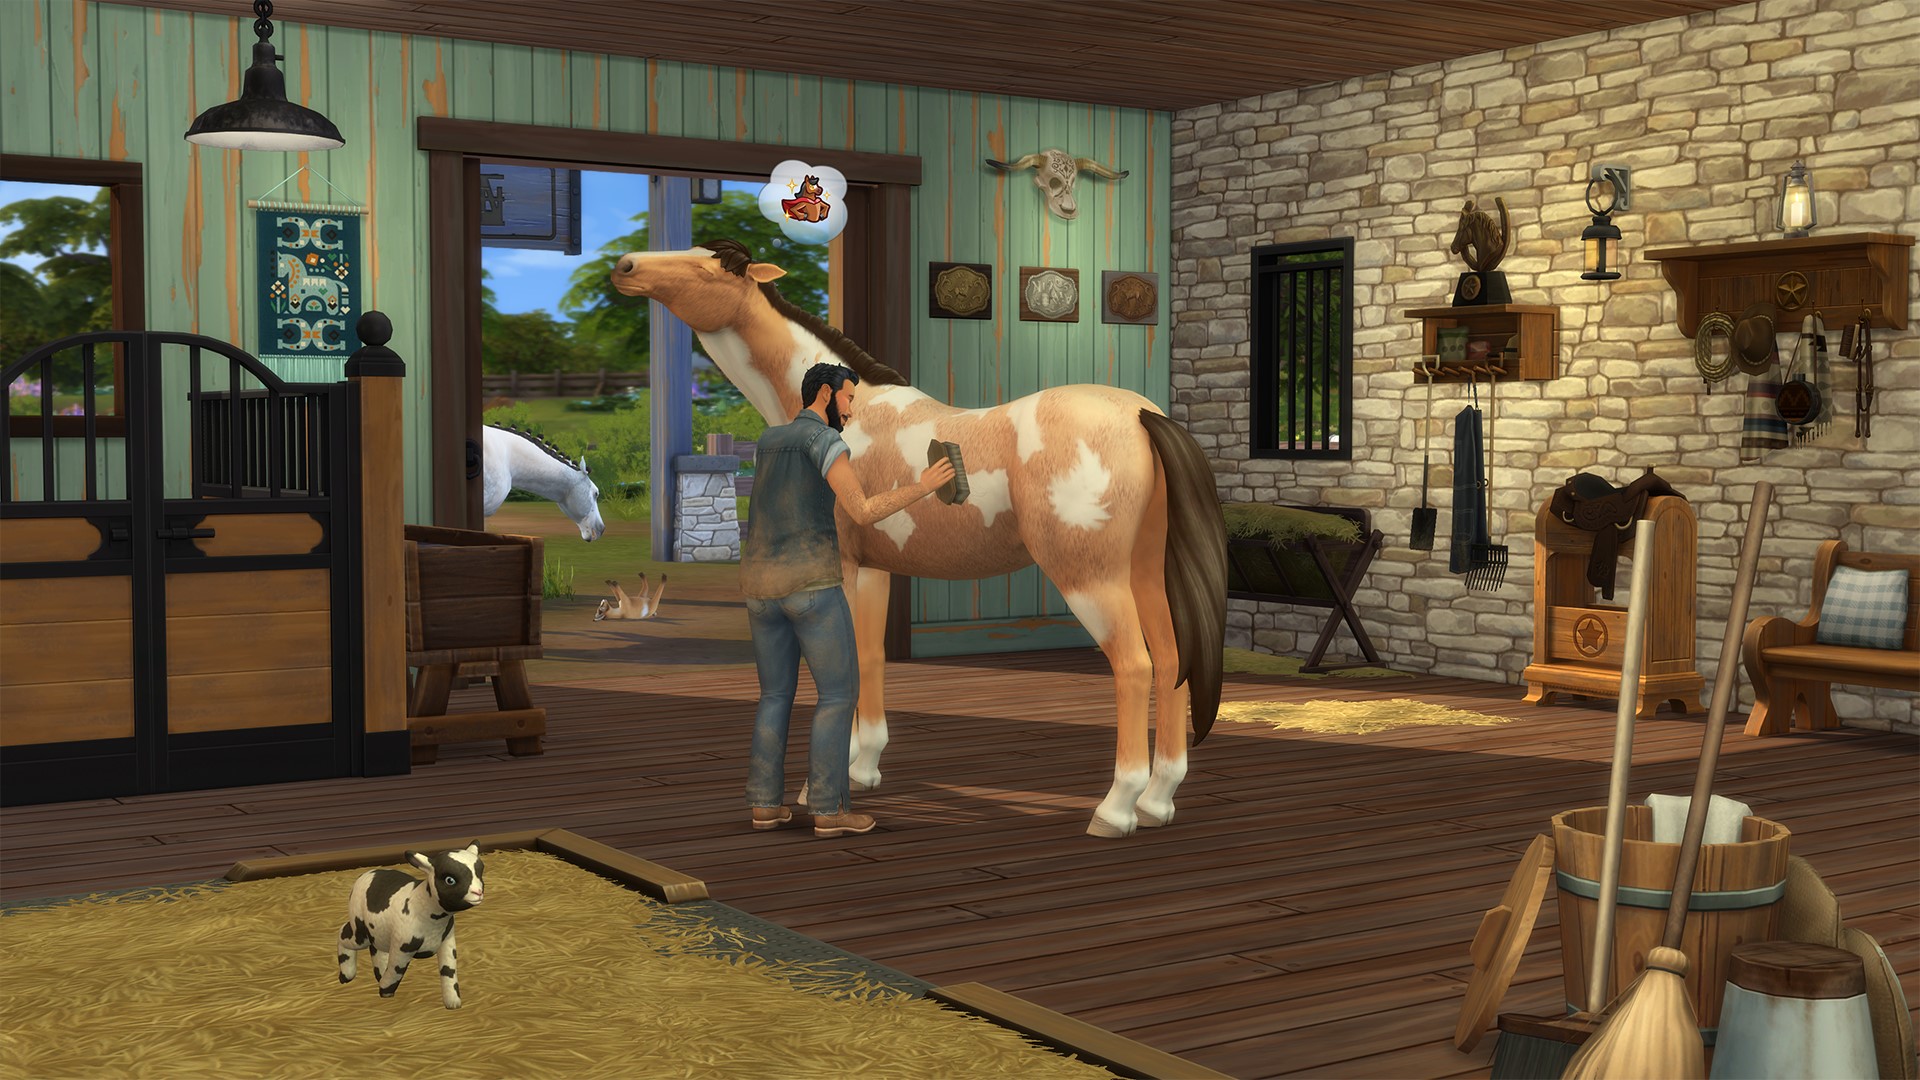 A Sim stands next to a horse, brushing it. The horse is a light tan color with white spots and a brown mane and tail.